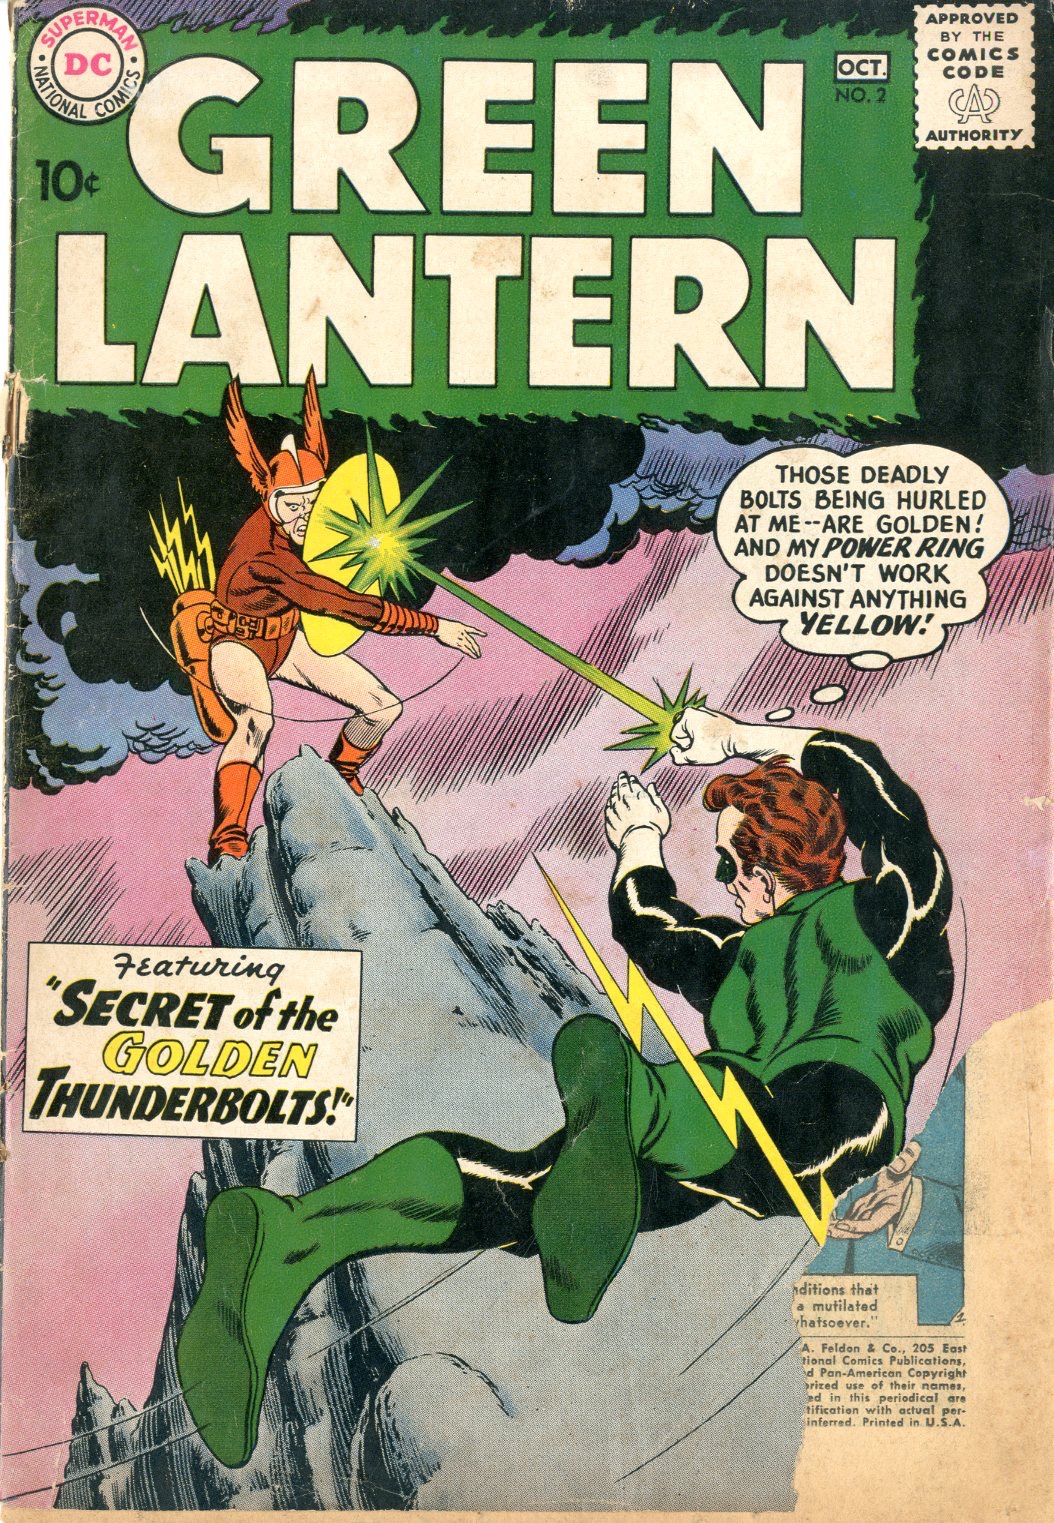 GREEN LANTERN / Issue 2 Sold Details Four Color Comics